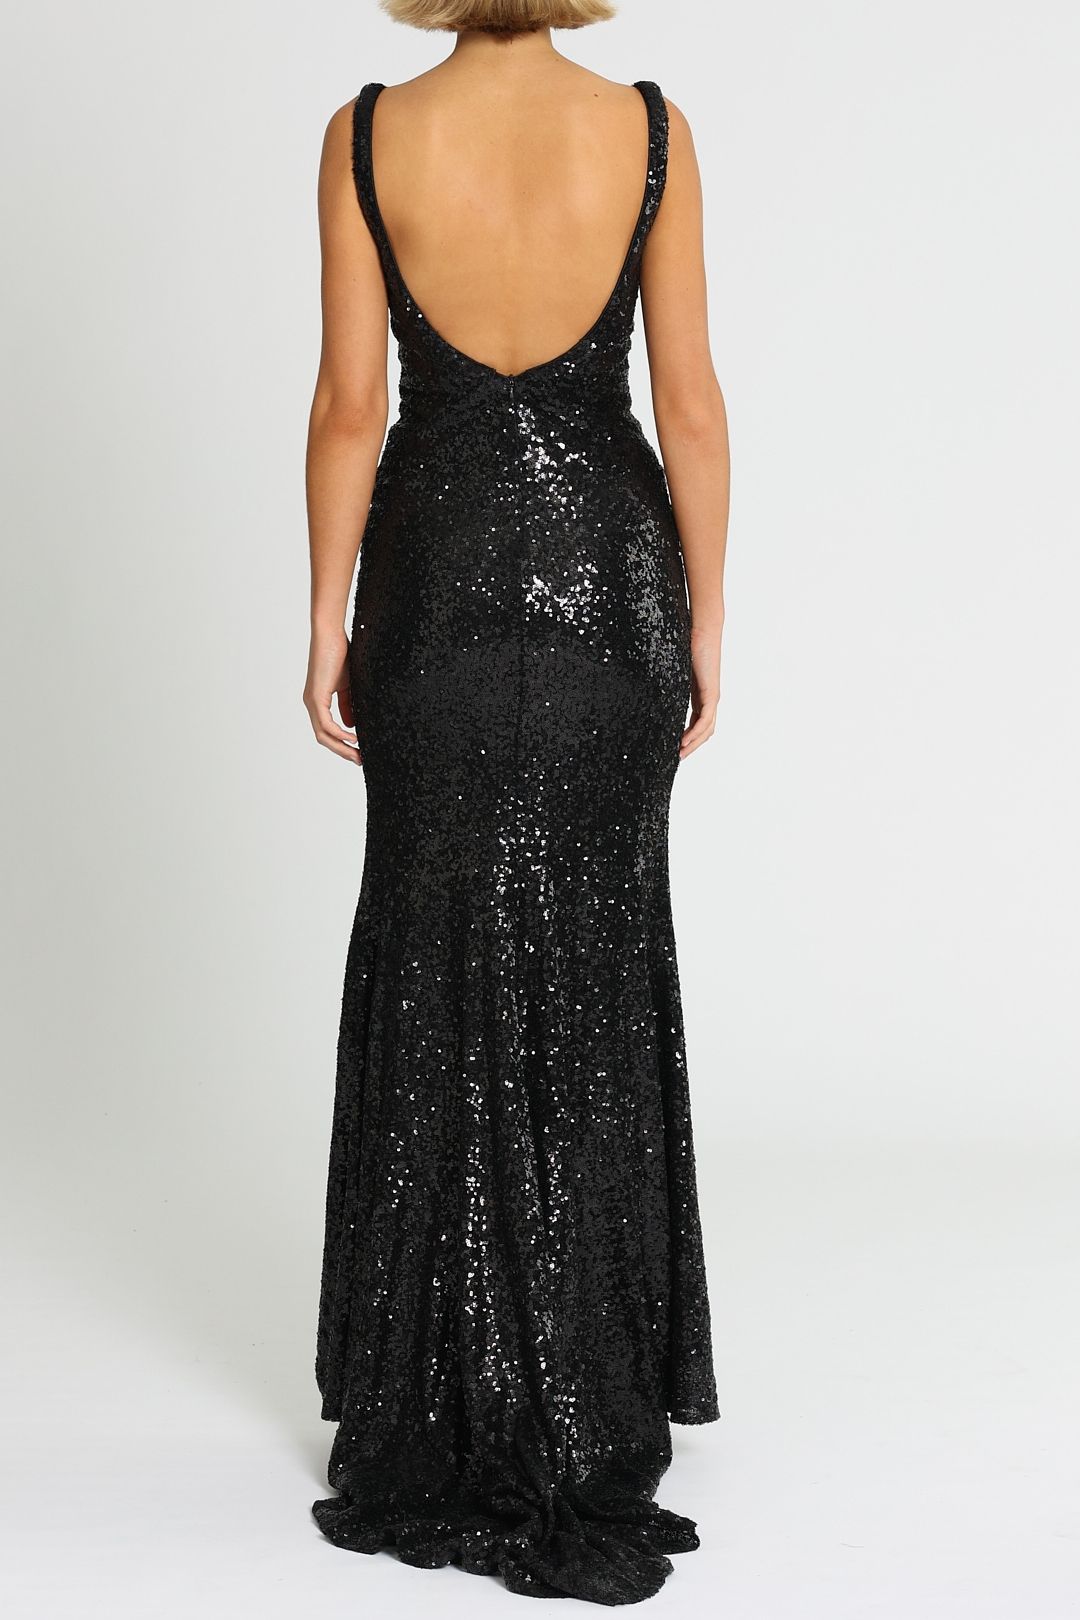 Tinaholy Annalise Sequin Gown Black Open Back